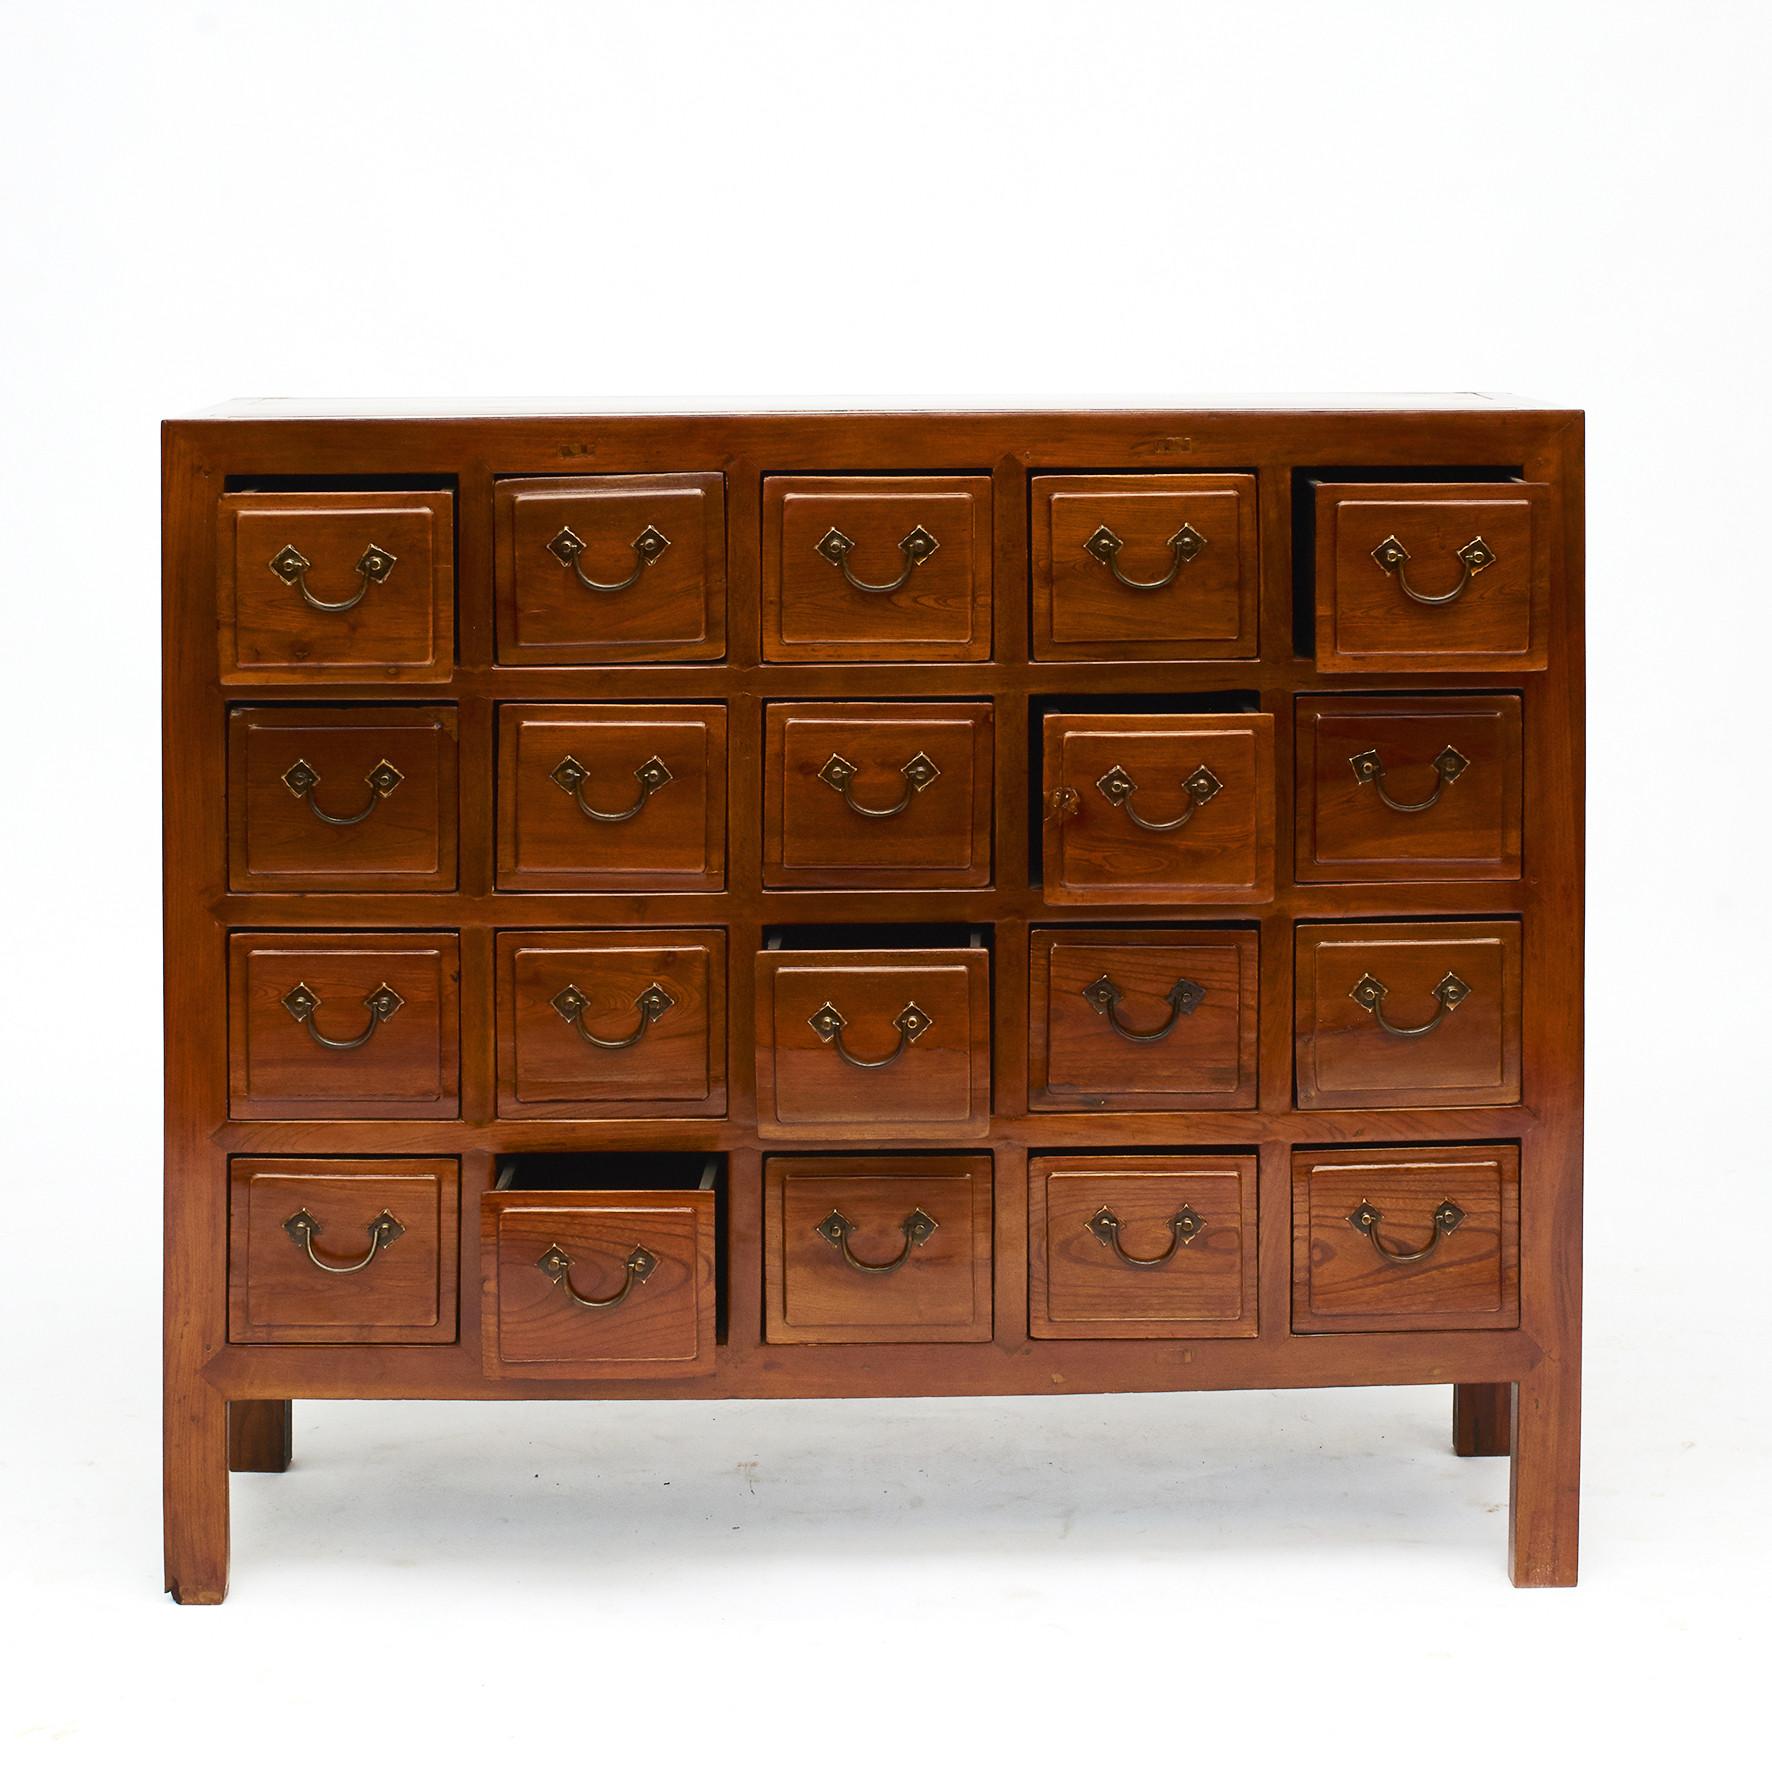 Chinese elm apothecary / pharmacy medicine chest with 20 drawers.
Made in Jumu wood, also called 